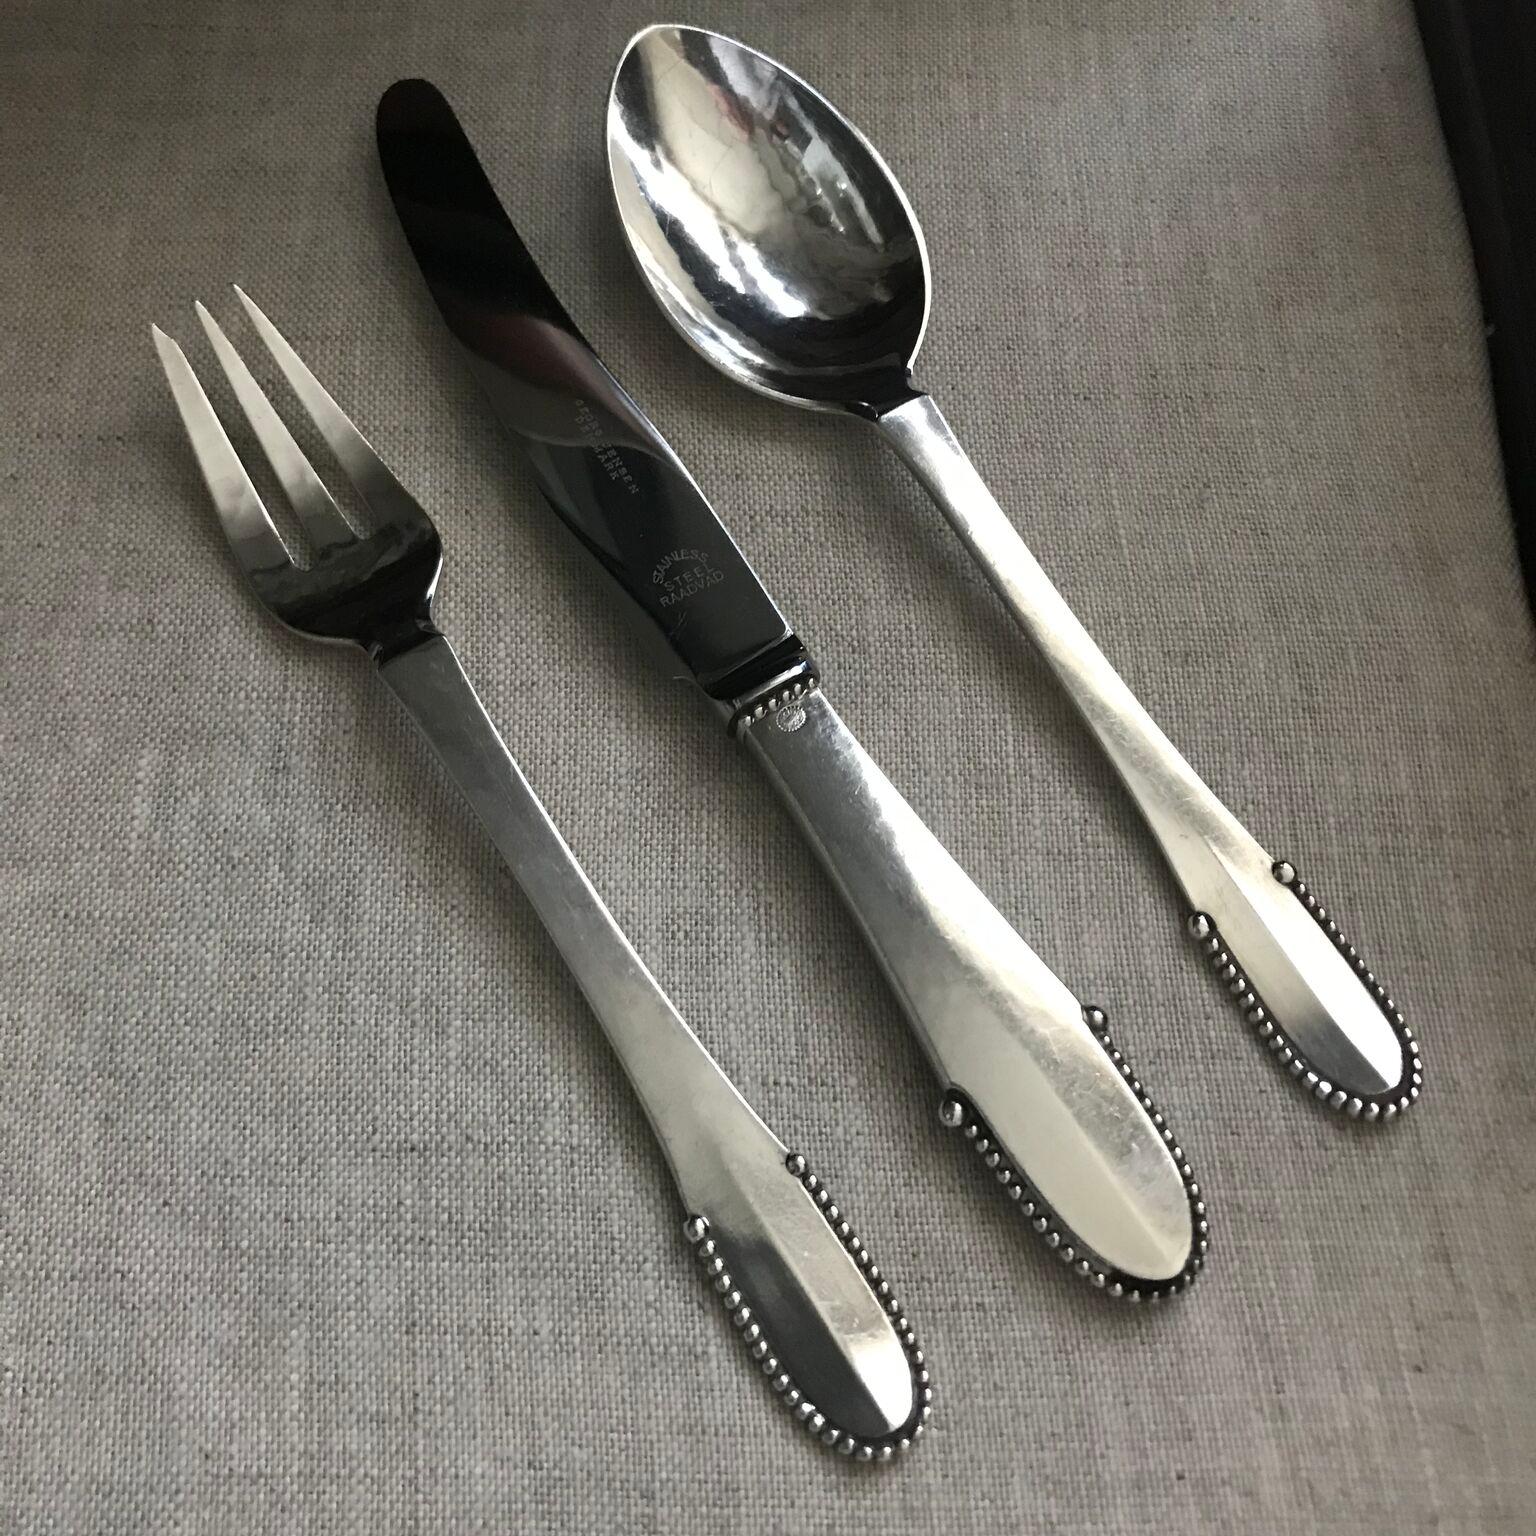 Vintage Georg Jensen sterling silver beaded service setting for 6

6 place settings comprised of: 

3 piece place setting:

Knife 6.5’’

Fork 5.5’’

Spoon 6’’

Total foe 18 pieces. Hand and engraving on the back of each piece, see